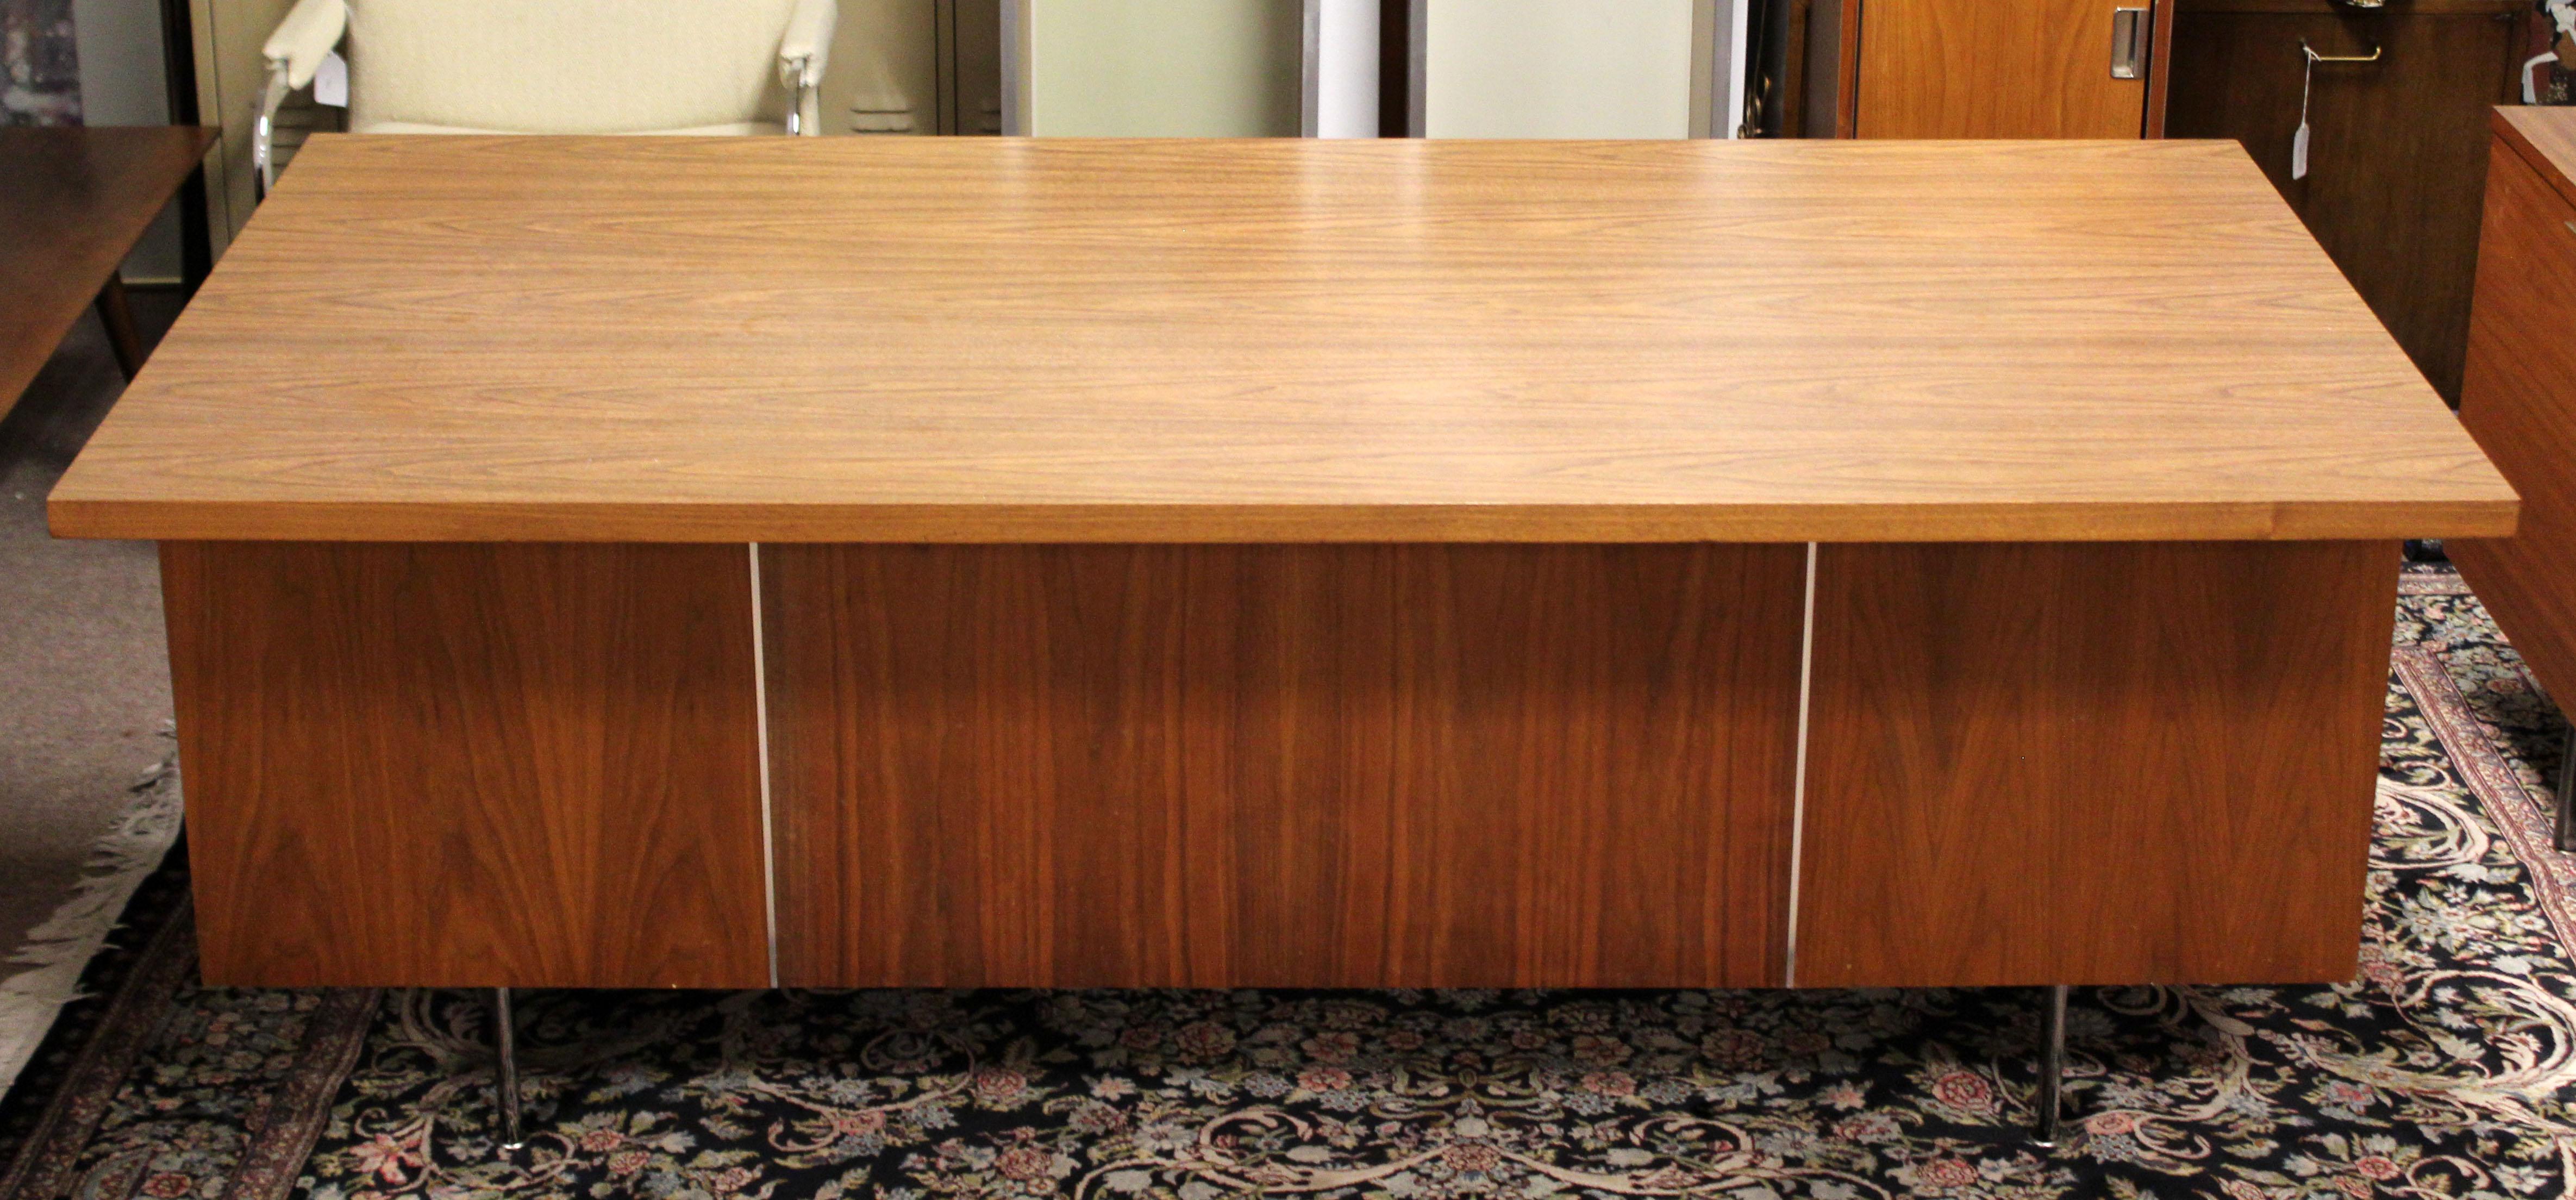 For your consideration is a marvelous, office desk, with five drawers, by George Nelson for Herman Miller, circa the 1950s. Walnut wood with floating top. In very good condition. The dimensions are 71